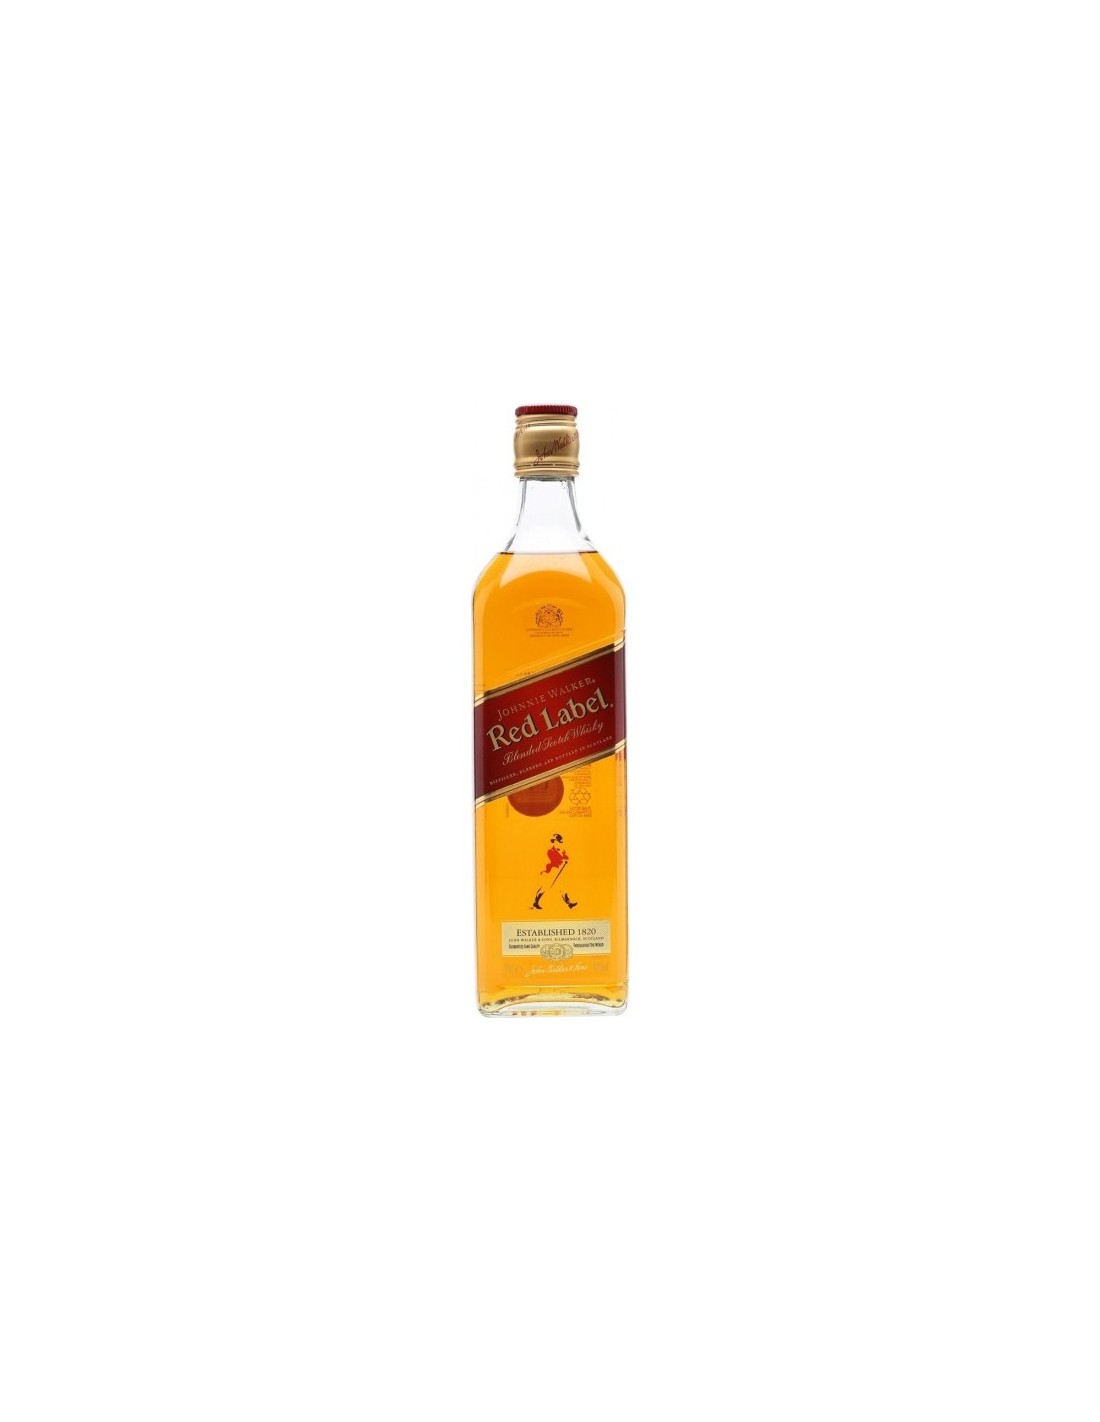 Whisky Johnnie Walker Red Label 0.5L, 40% alc., Scotia